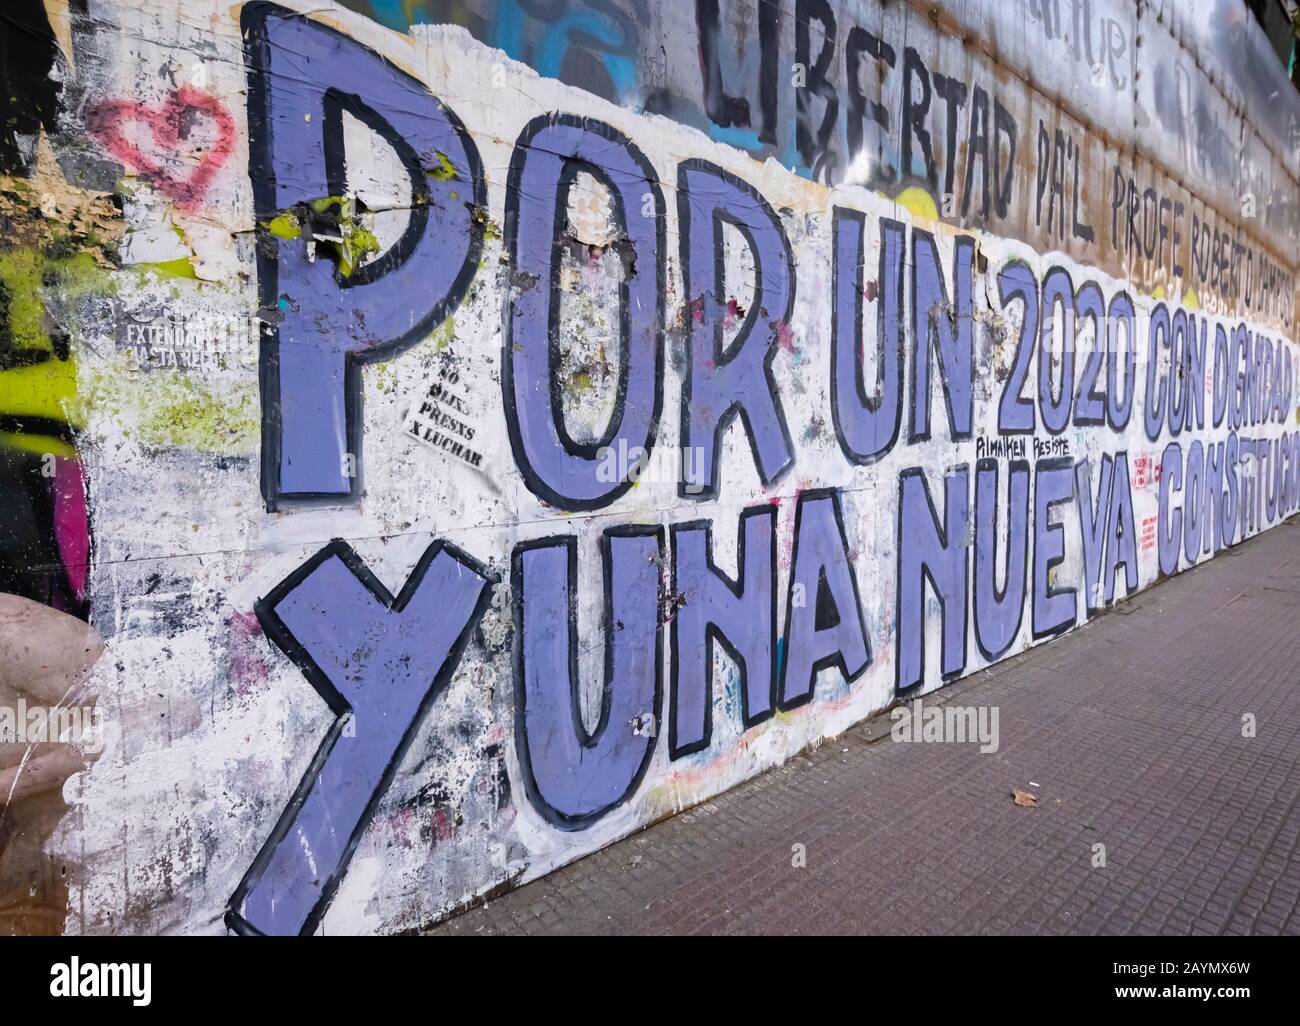 Graffiti on a wall from the political unrest and protests in Lastarria, Central Santiago, Metropolitan Region, capital city of Chile, South America Stock Photo